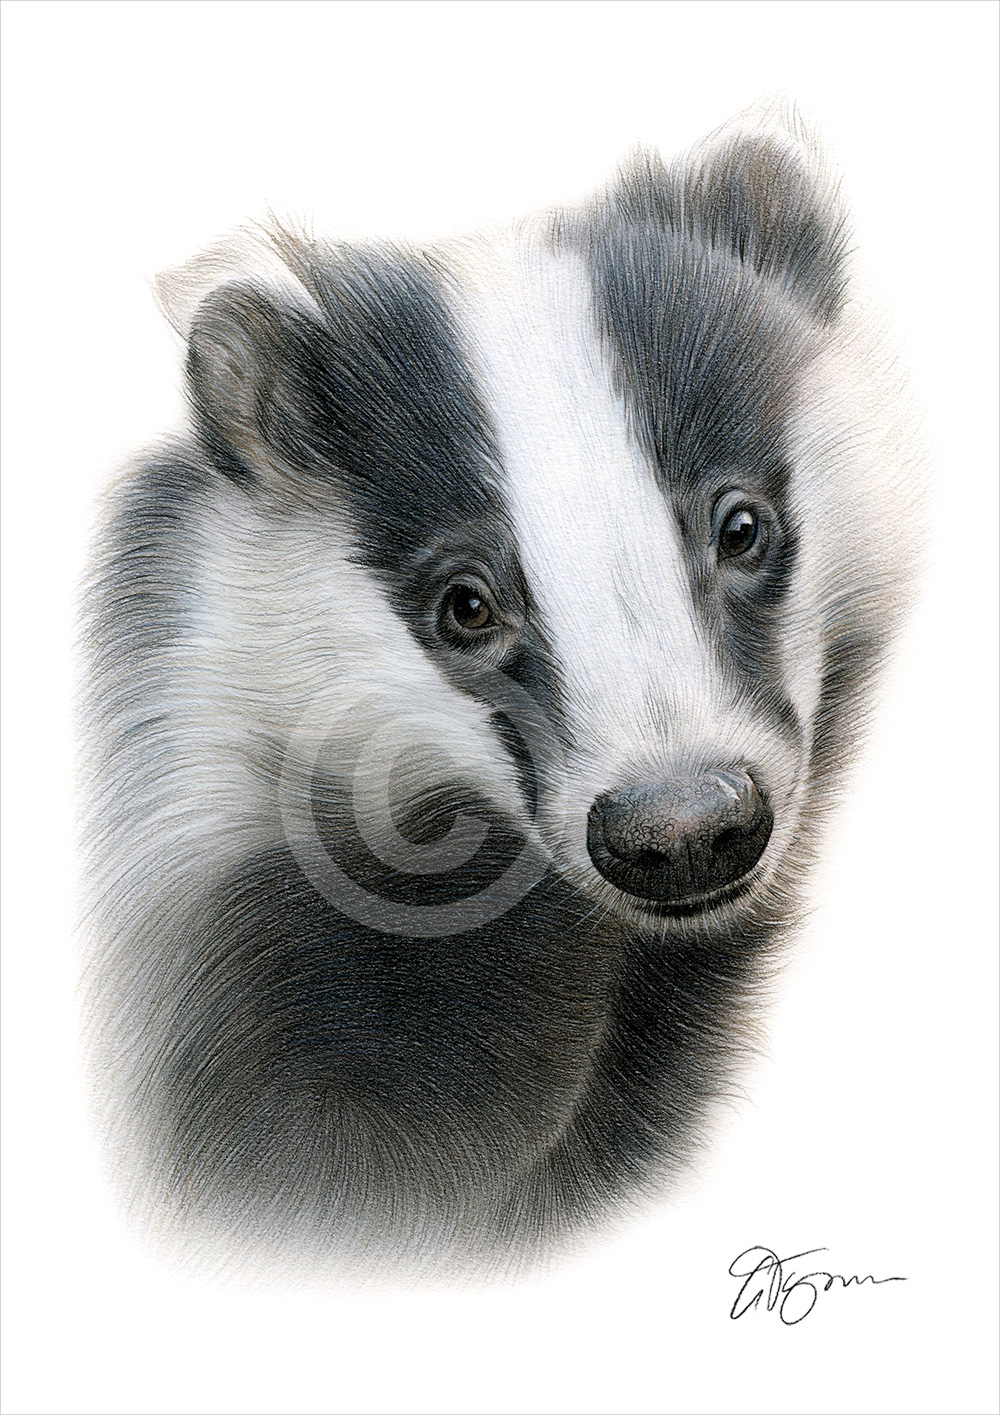 Colour pencil drawing of a badger by artist Gary Tymon